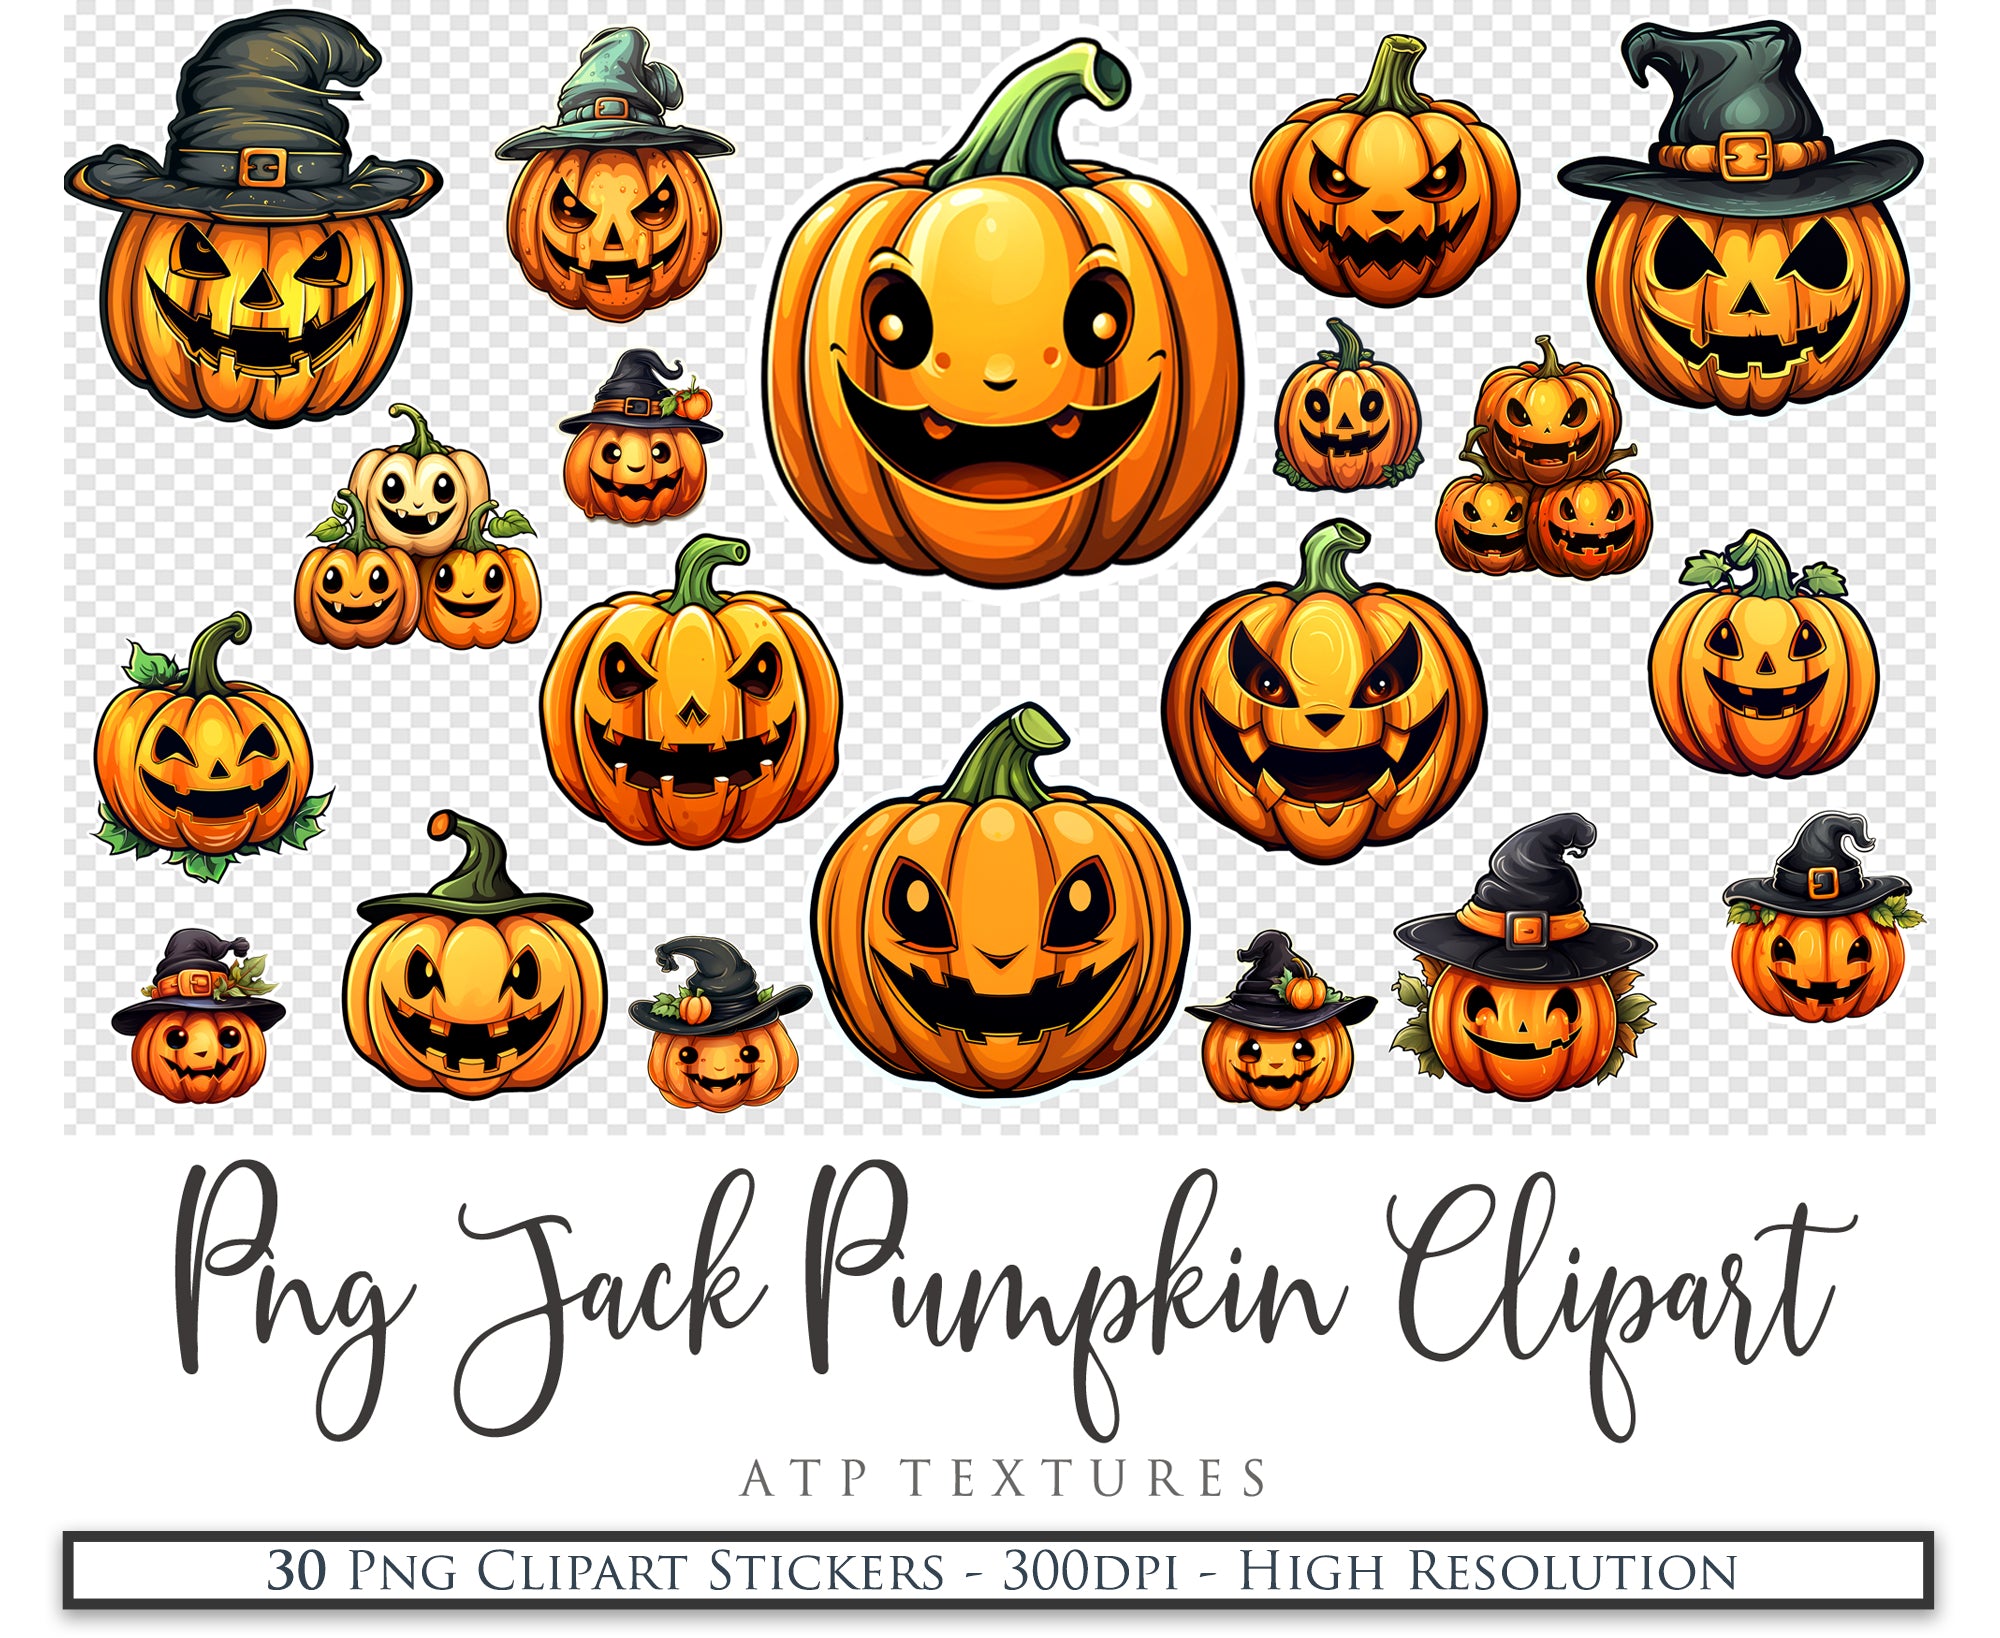 Halloween Day of the dead Pumpkin clipart. Perfect for scrapbooking and print. If you want to print your completed artwork, you can! PNG Transparent files, High resolution, 300dpi. AI Digital Art. - ATP Textures